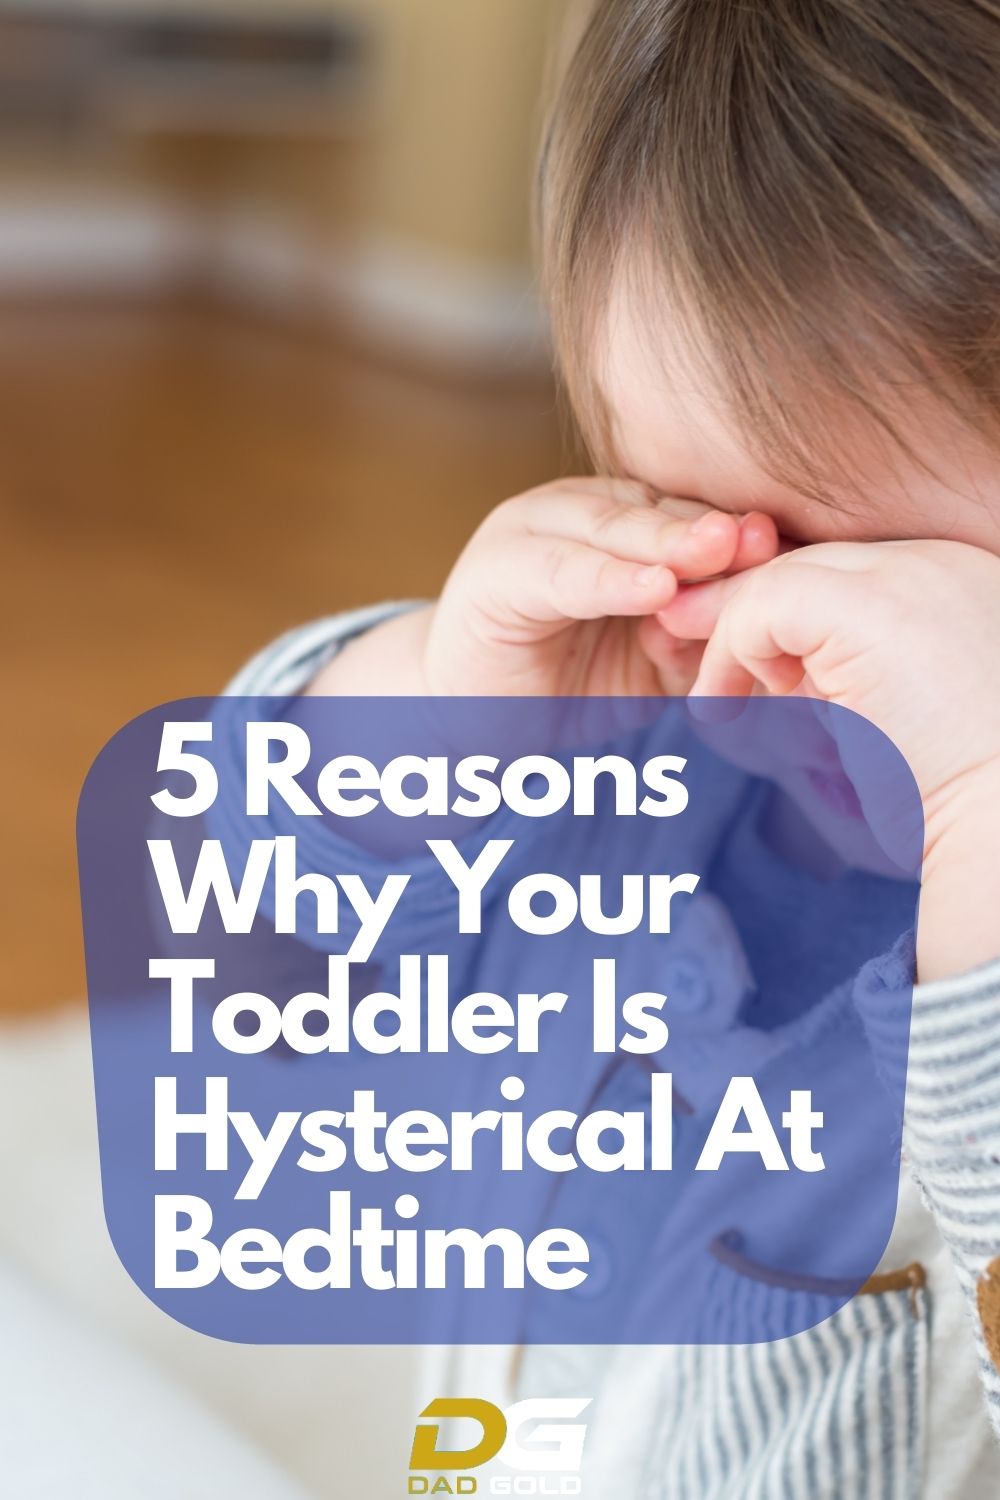 5 Reasons Why Your Toddler Is Hysterical At Bedtime